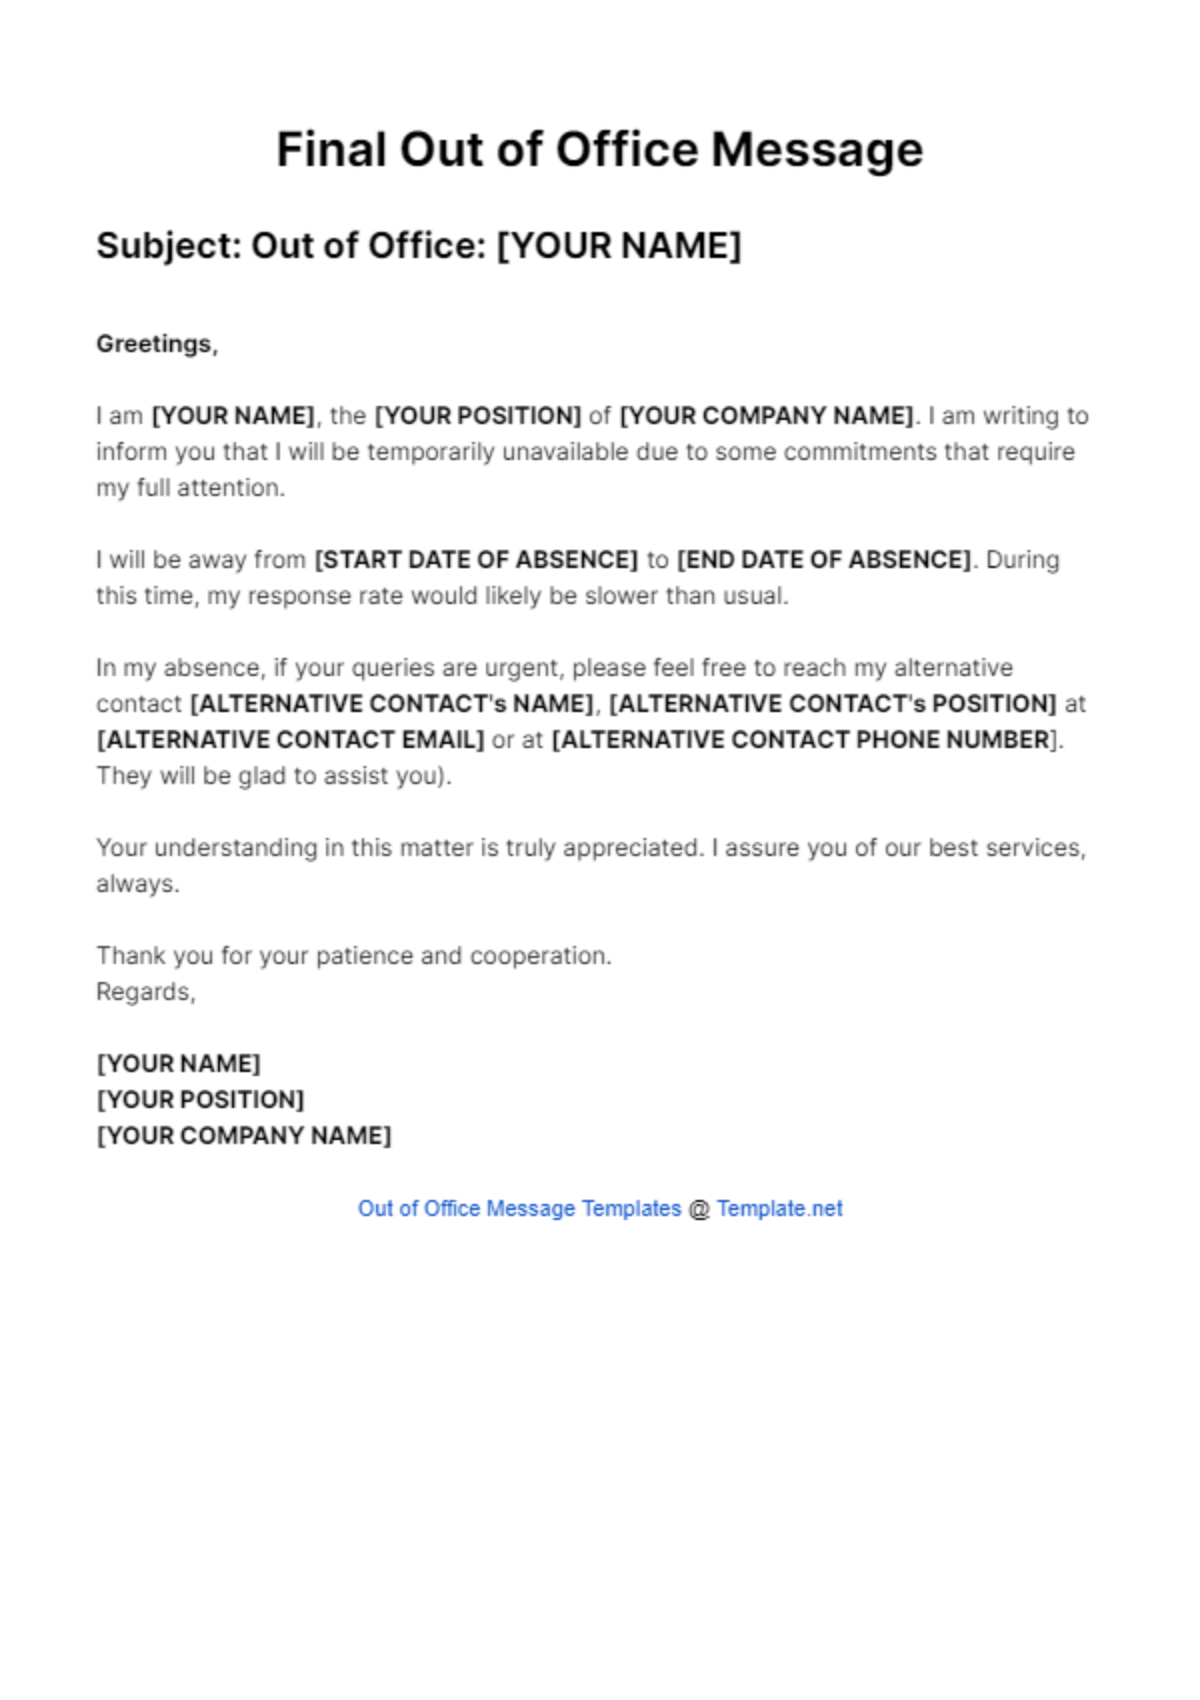 Free Final Out Of Office Message Template